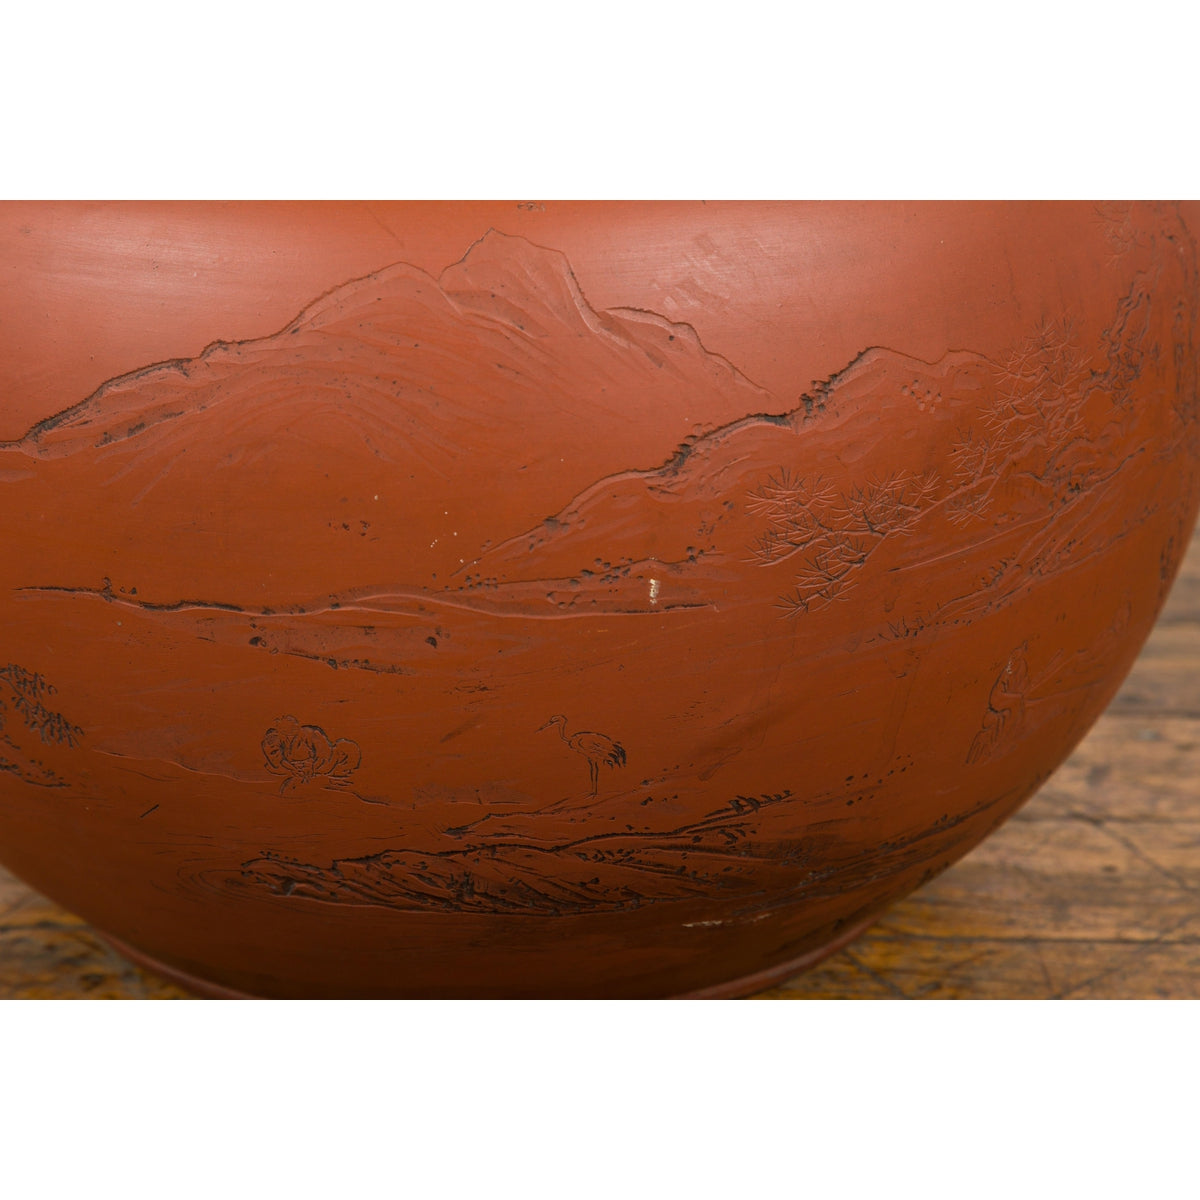 Orange Circular Antique Planter with Etched Design-YN7819-13. Asian & Chinese Furniture, Art, Antiques, Vintage Home Décor for sale at FEA Home